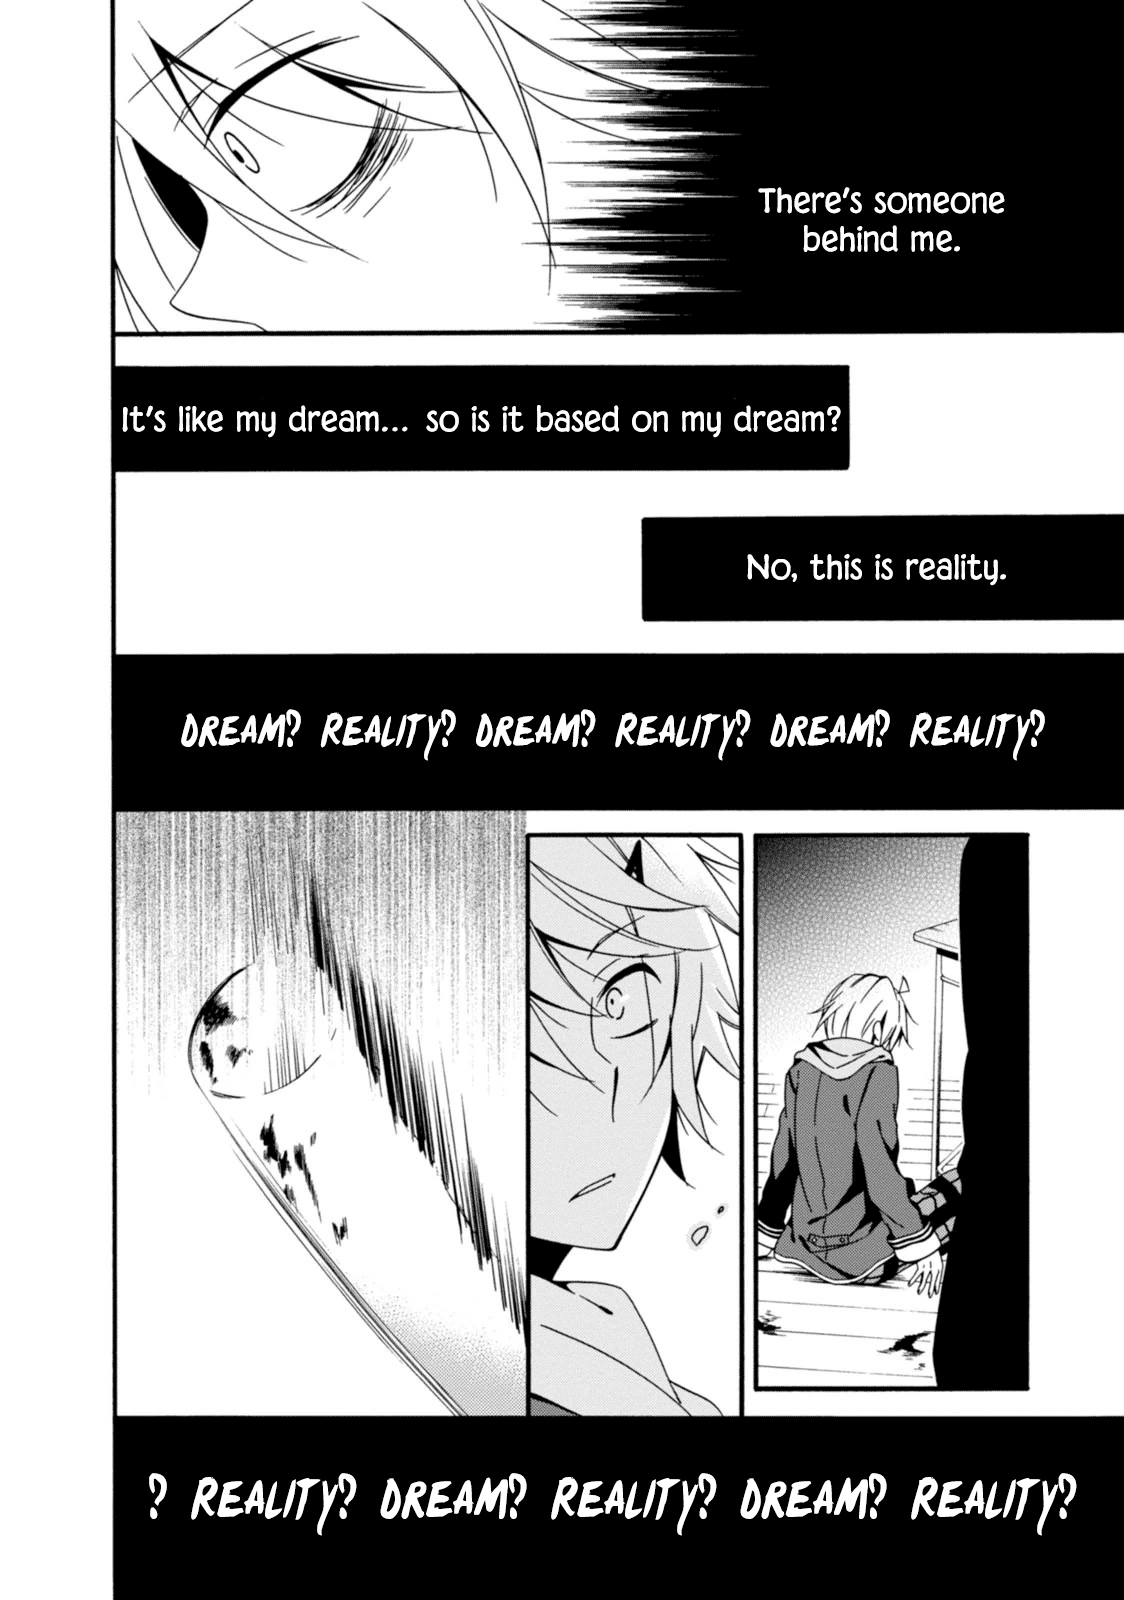 Shuuen no Shiori Vol. 7 Ch. 30 Schrödinger's Cat is Crying There (2)